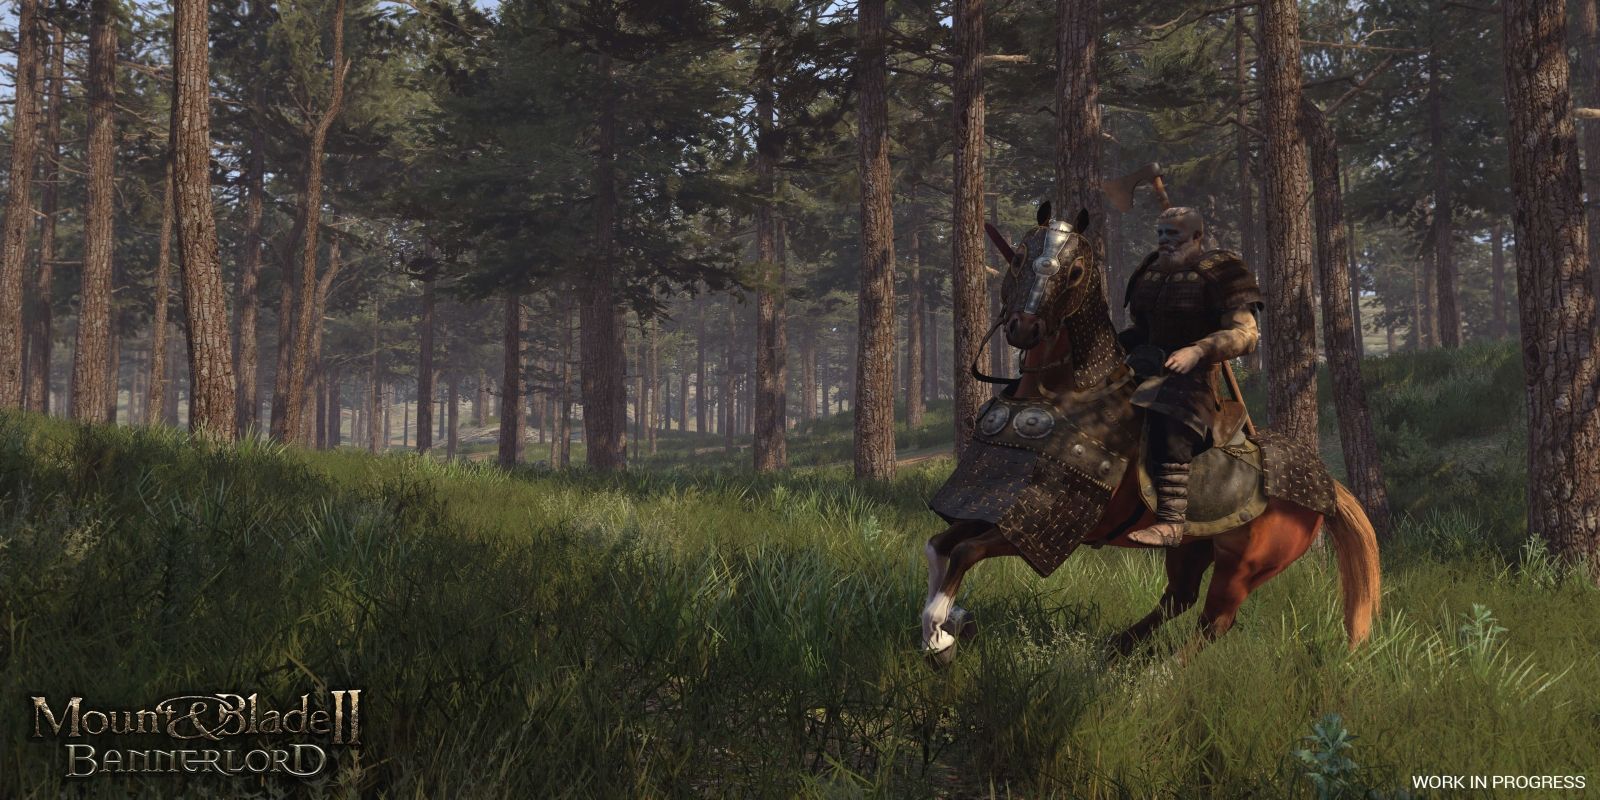 Mount and Blade 2: Bannerlord Mod Brings Slow-Motion Dismemberment To Players